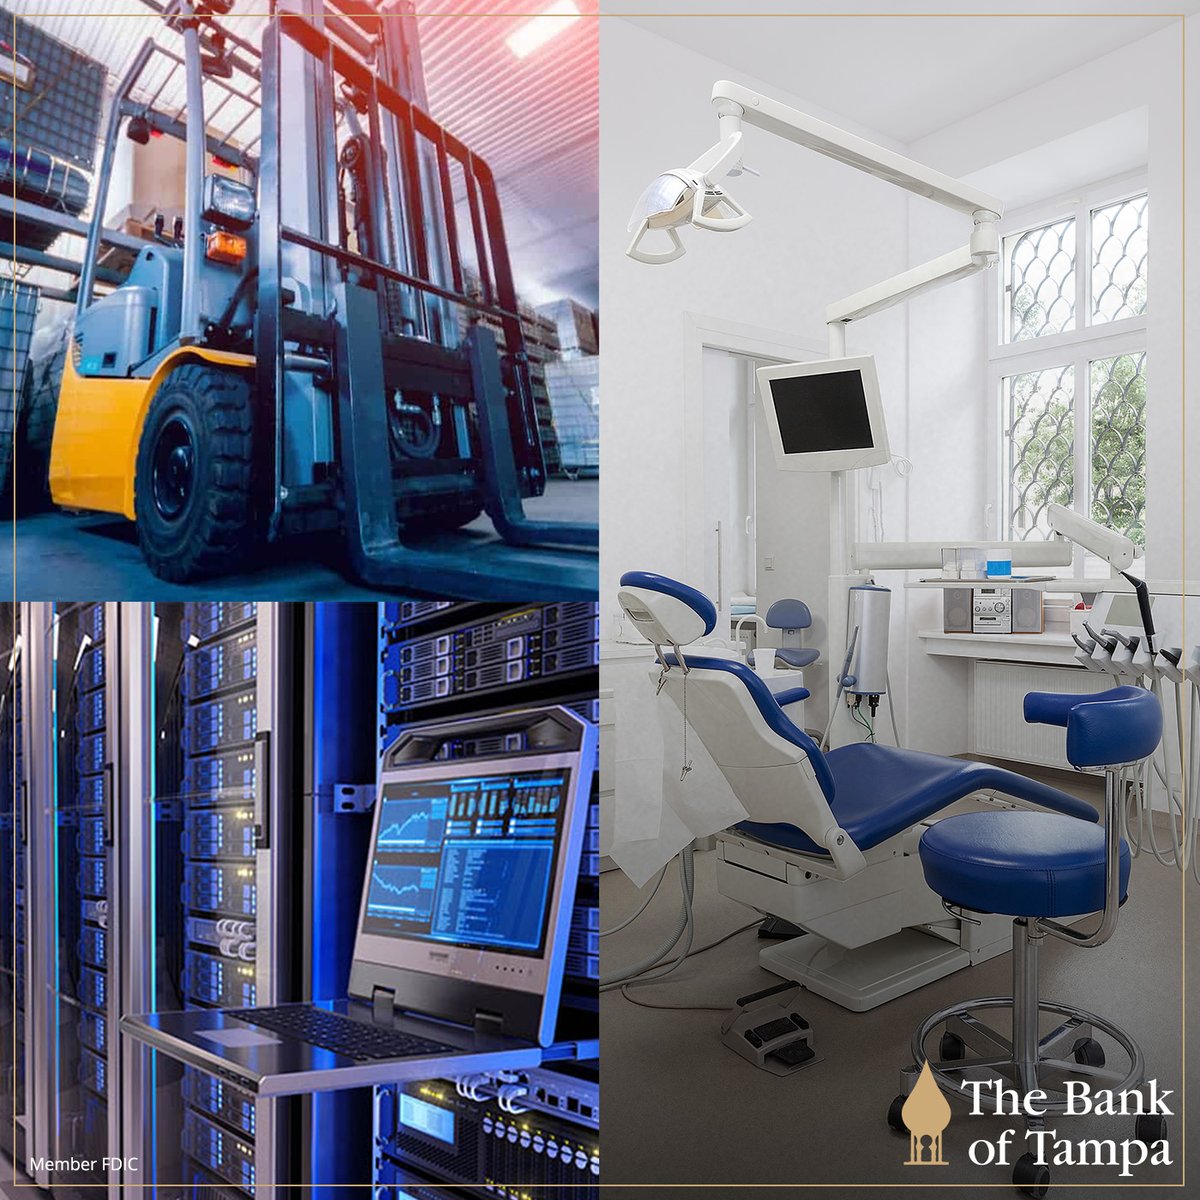 We can give your business the capital you need to make your next move. From construction and manufacturing equipment to medical equipment and more—whatever your needs may be, we can help find a solution. #EquipmentFinancing #CommercialBanking